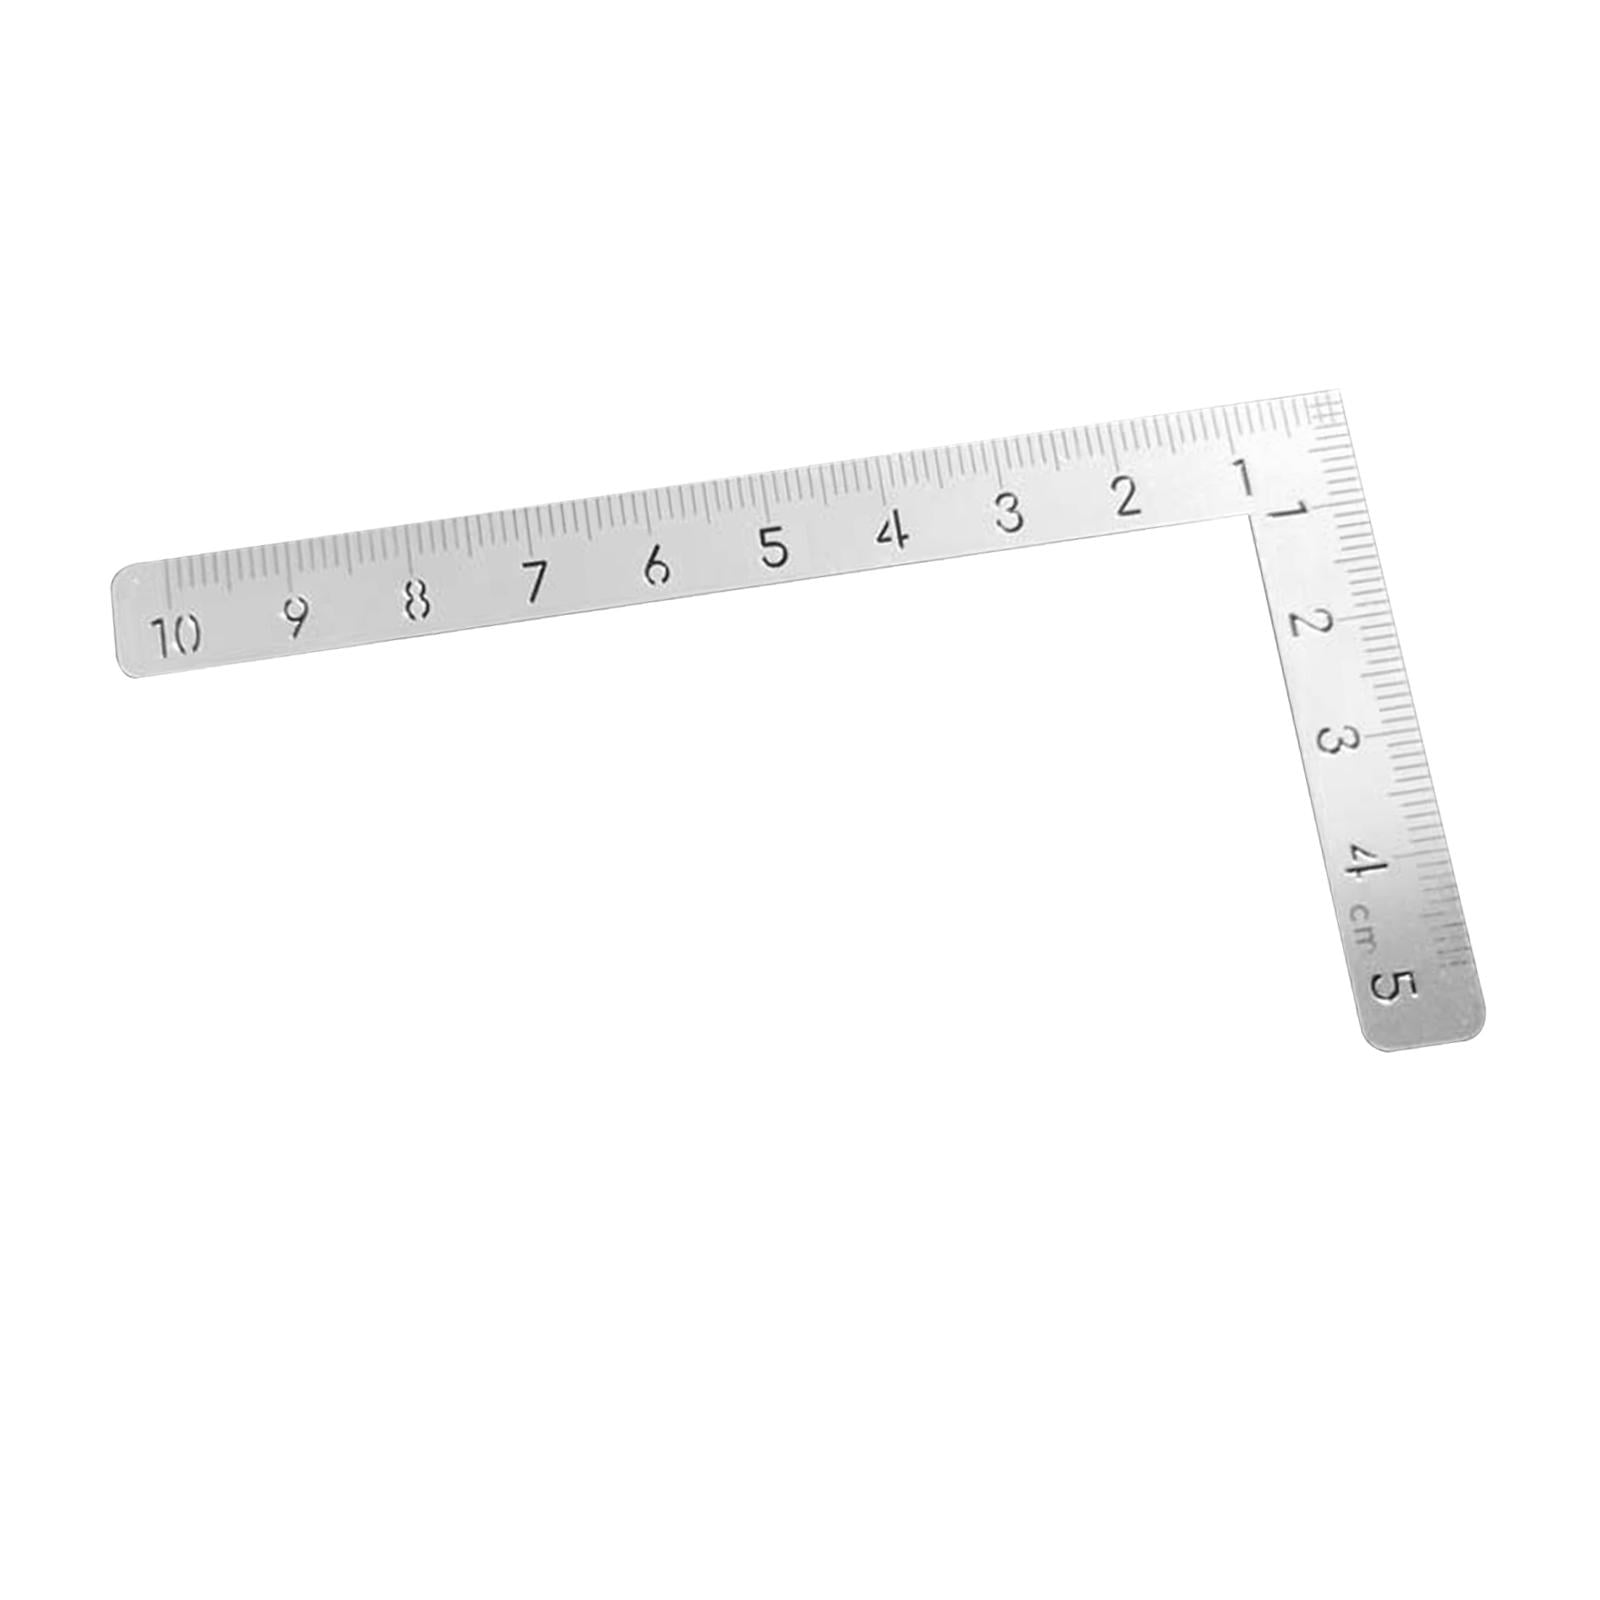 2 Pack Mini Framing Ruler Measuring Layout Tool Stainless Steel Square  Right Angle Ruler Precision for Building Framing Gauges Ruler,Leather Right  Angle Ruler,50x100x1.2mm 